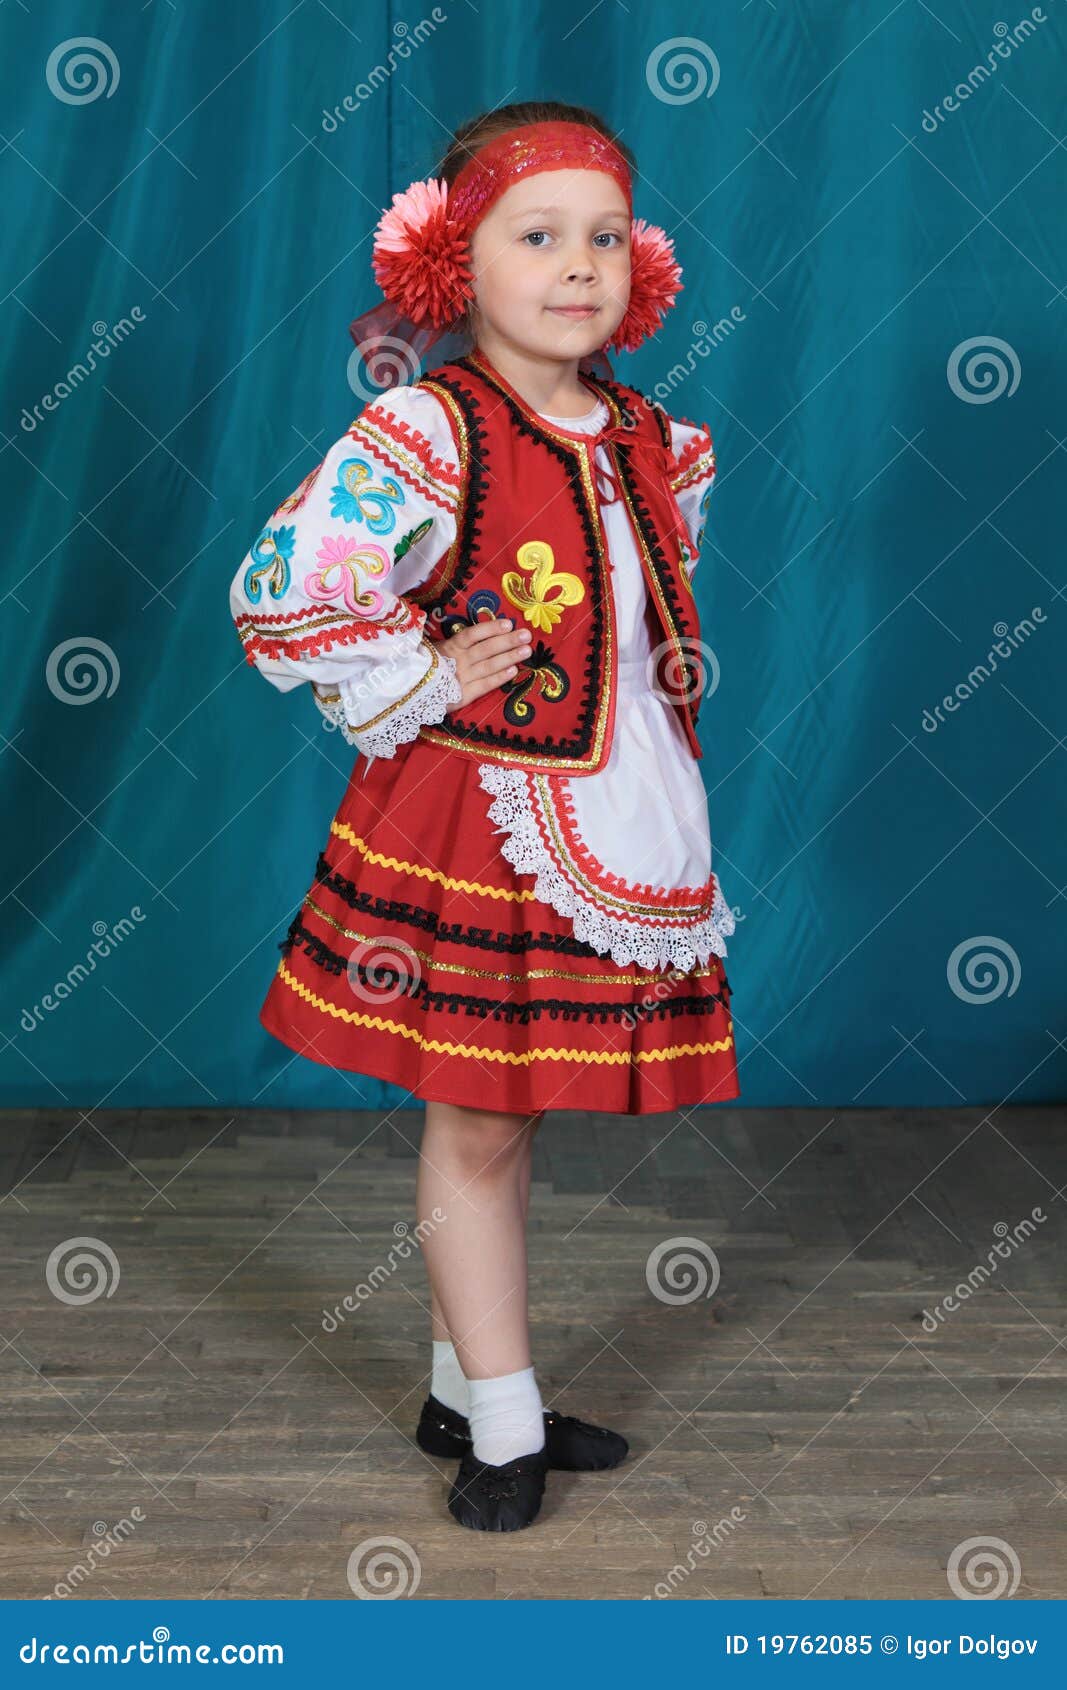 Costume stock image. Image of frock, child, finery, stand - 19762085